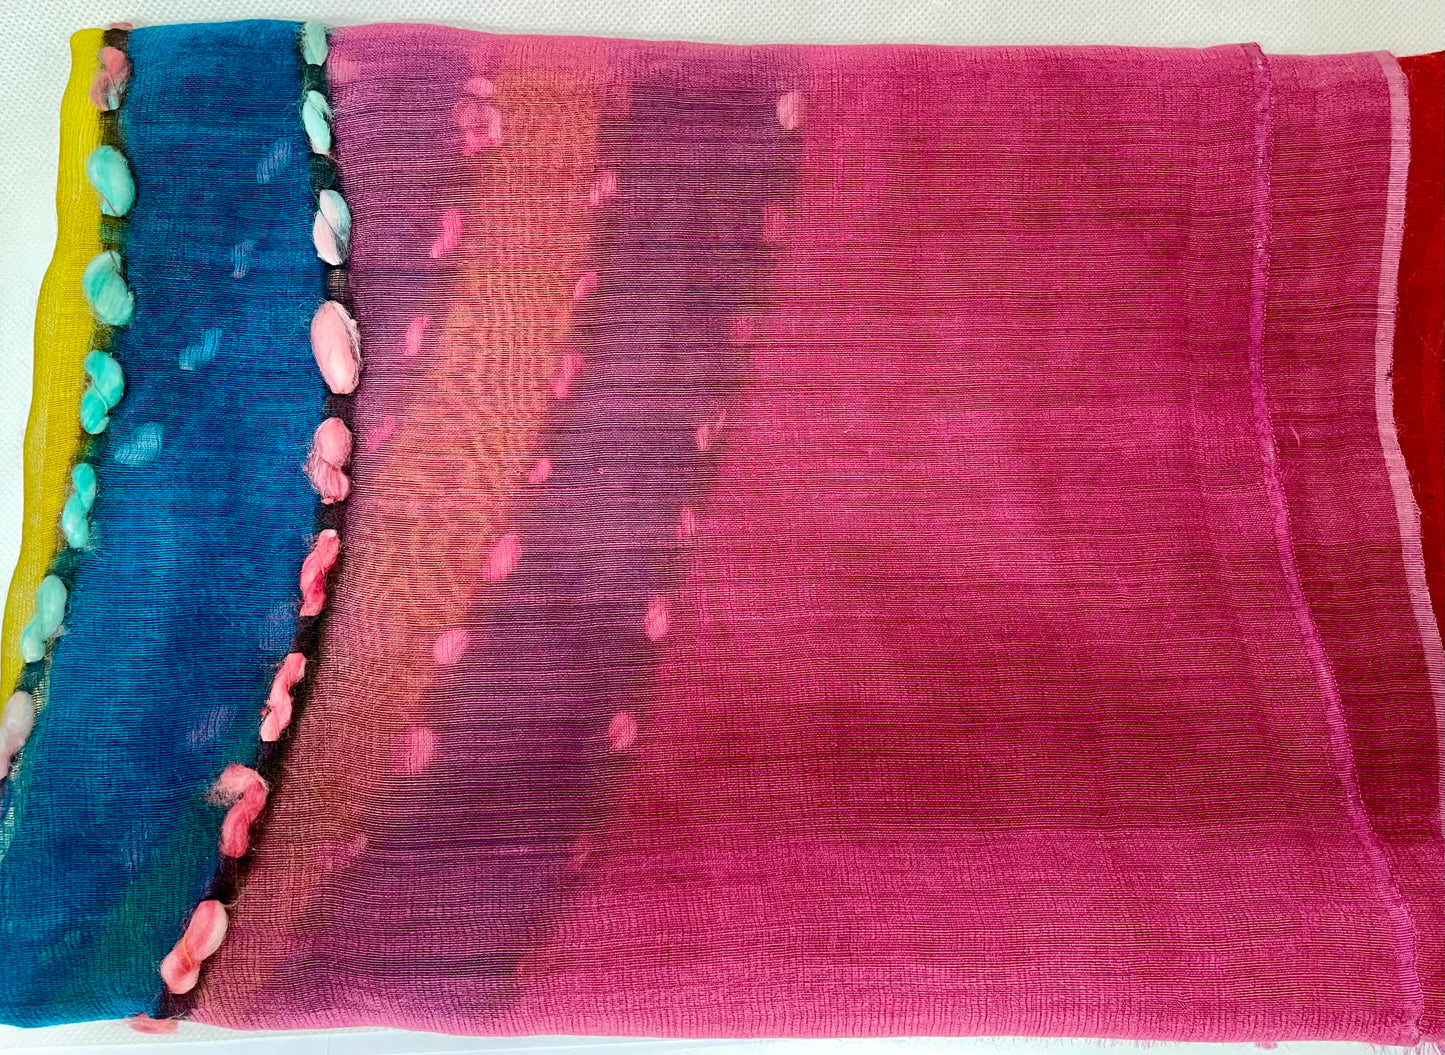 The Red and Pink Scarf - Hand Painted and Hand Embroidered